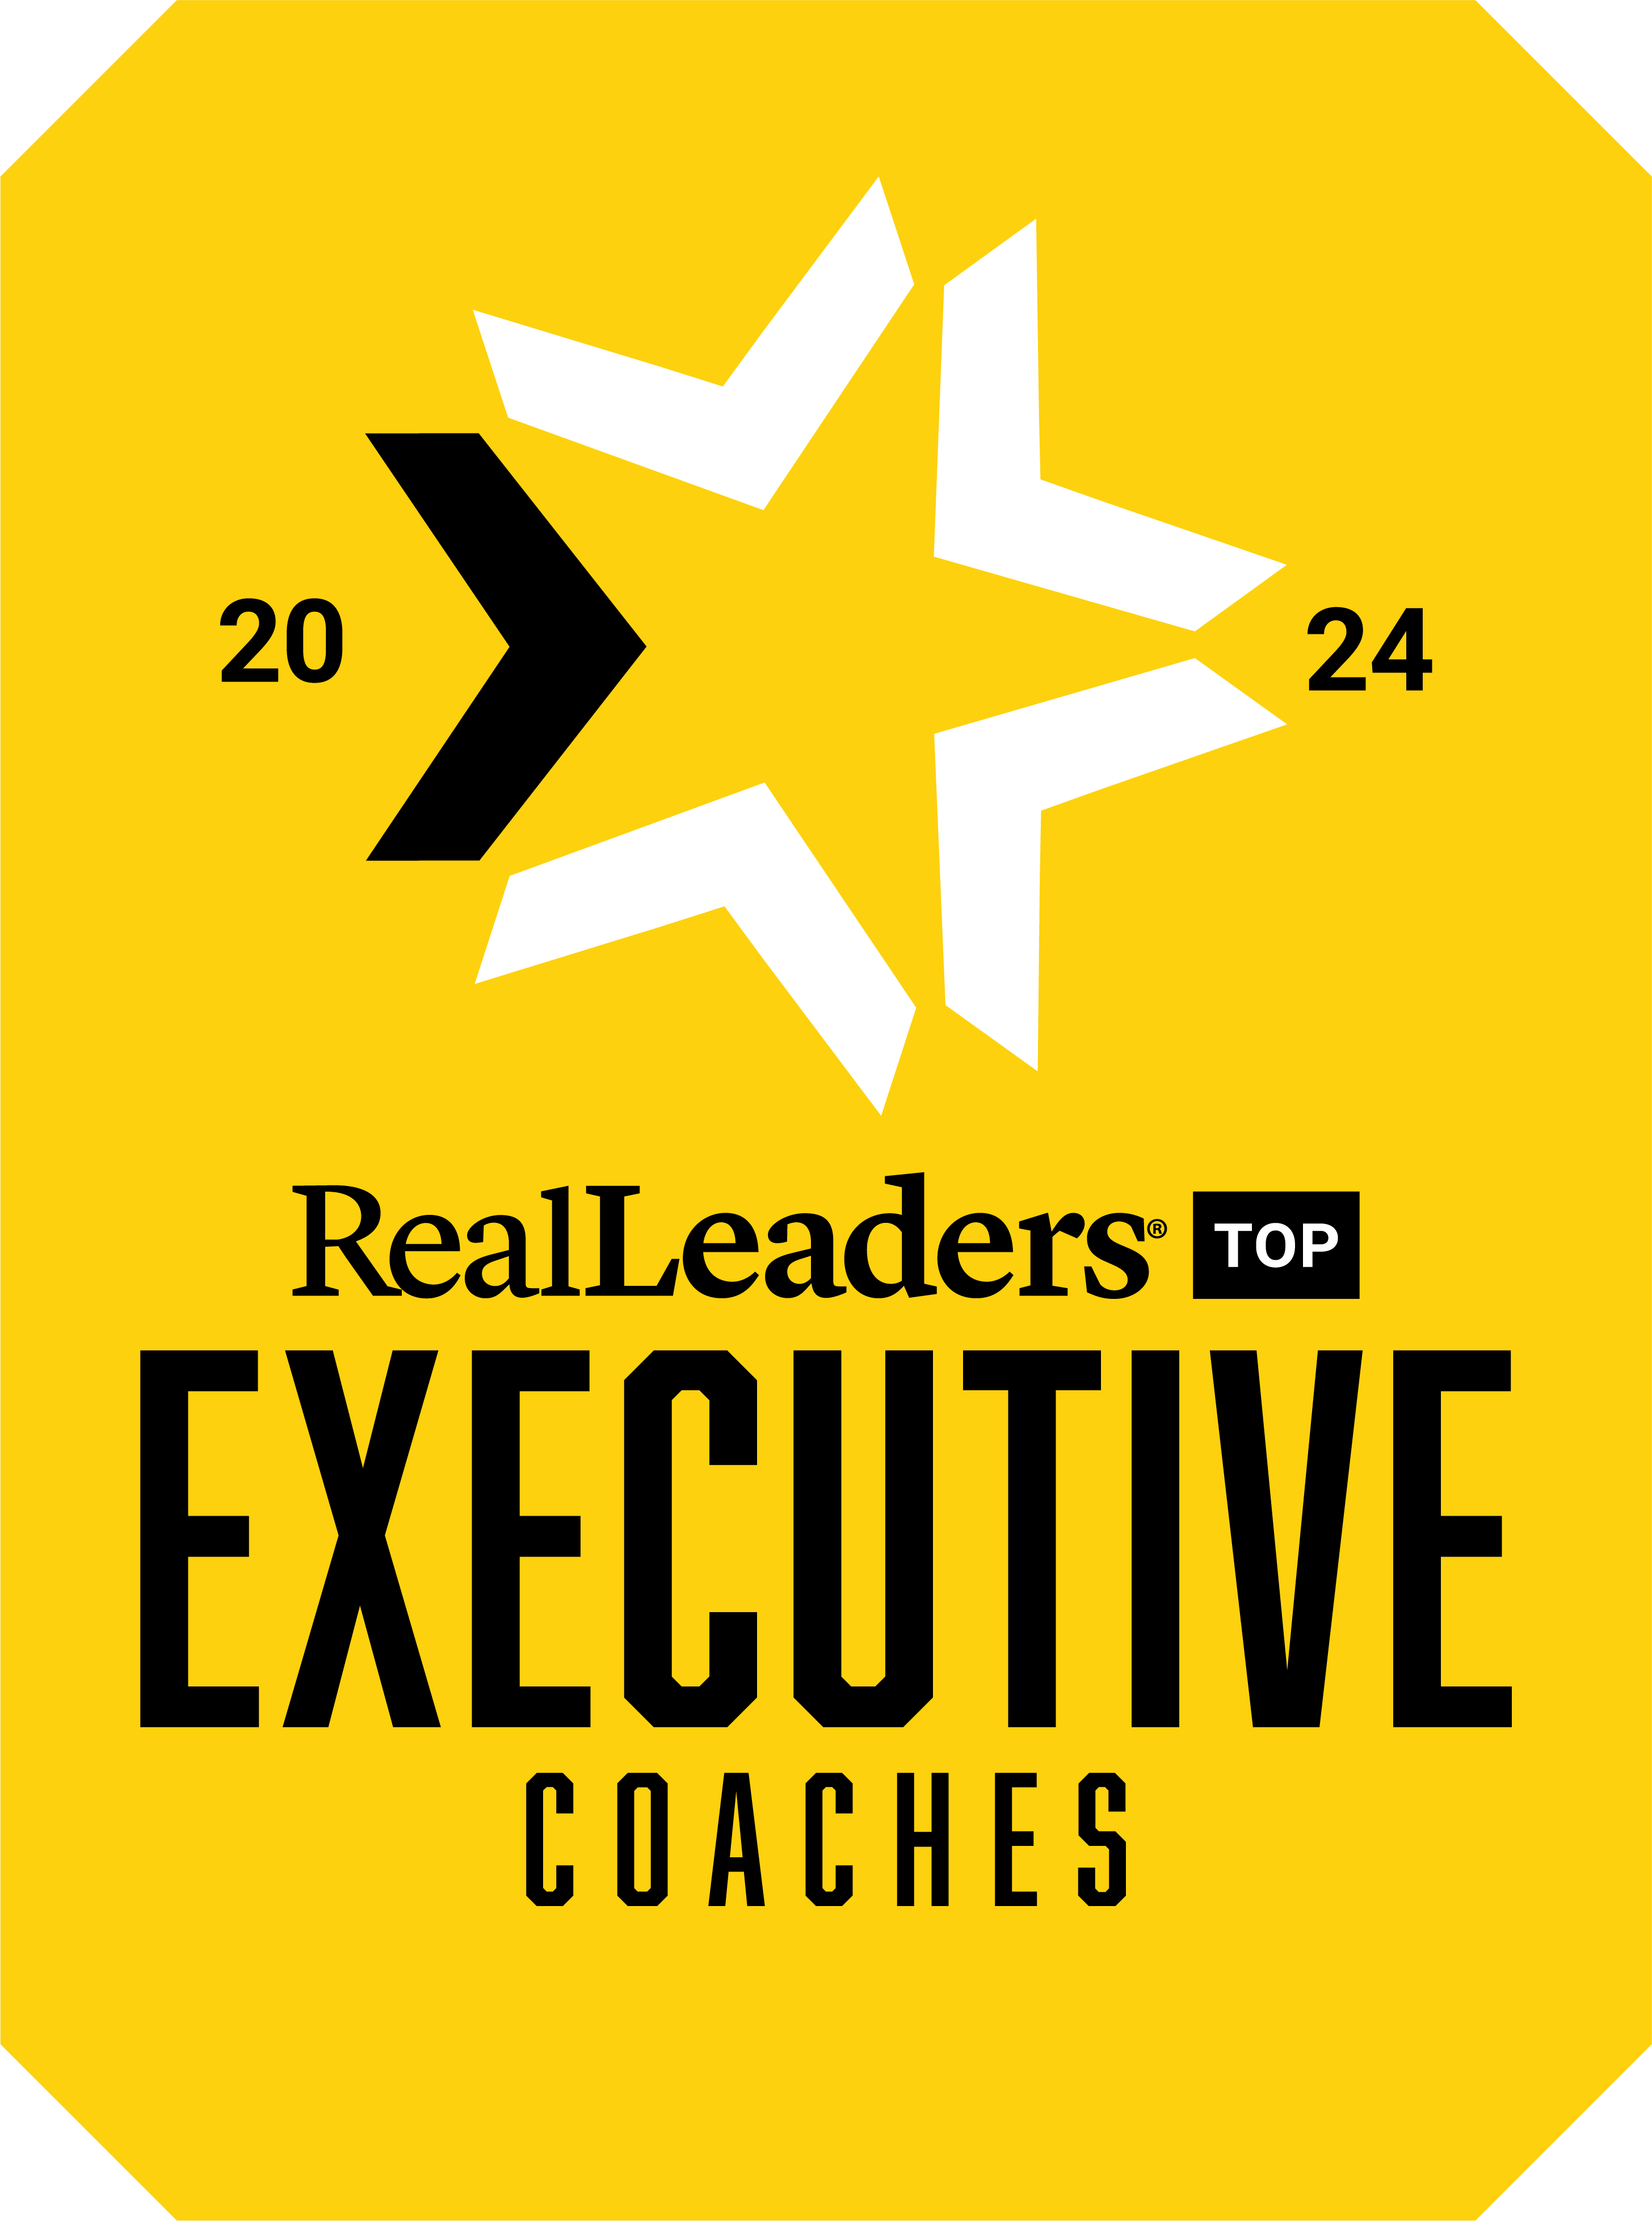 RealLeaders_TopExecutiveCoaches_badge_fullcolor